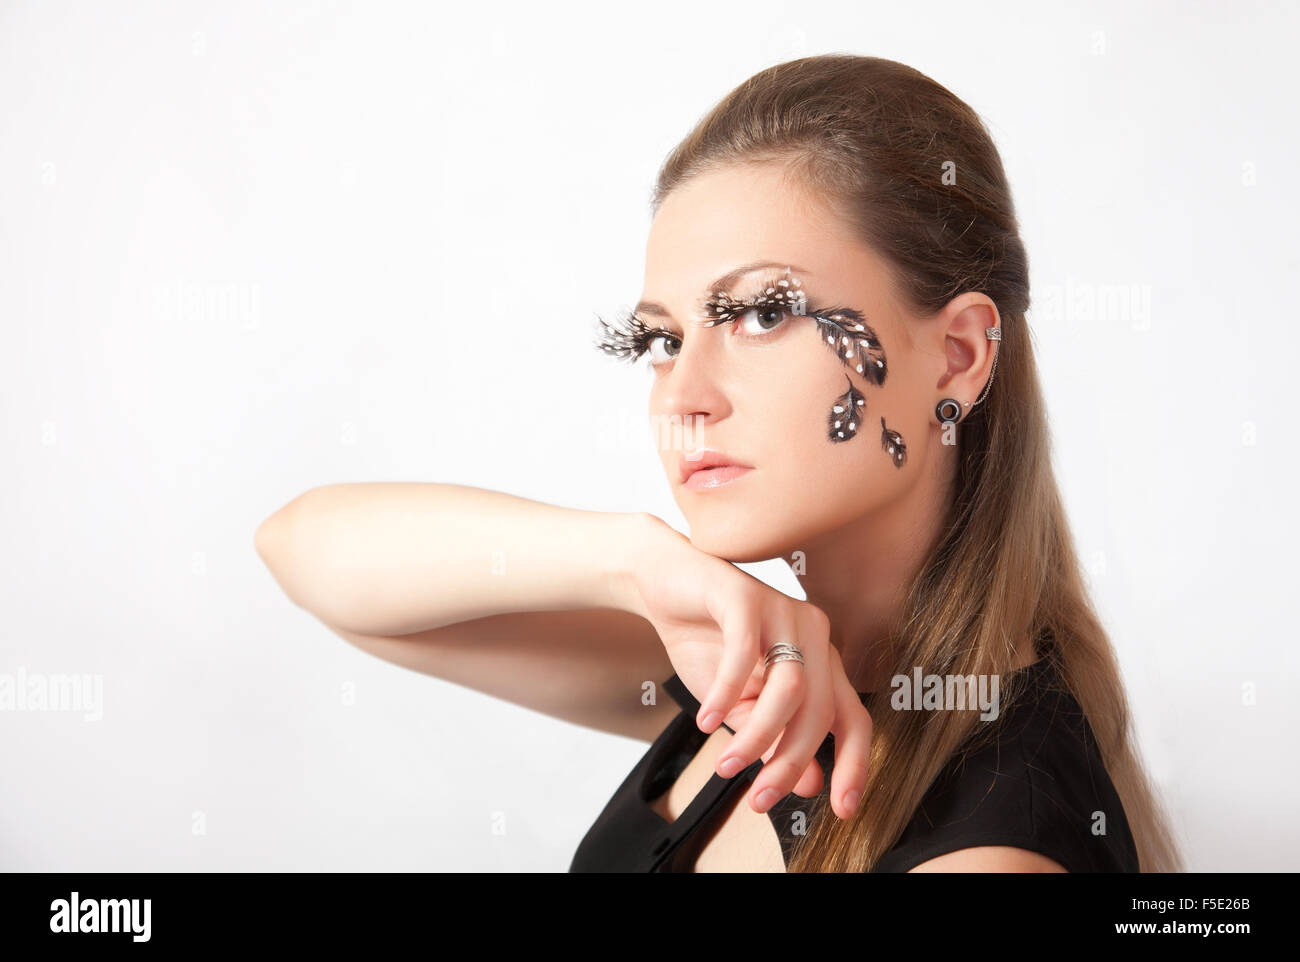 Beautiful woman with big eyelashes and face-art Stock Photo